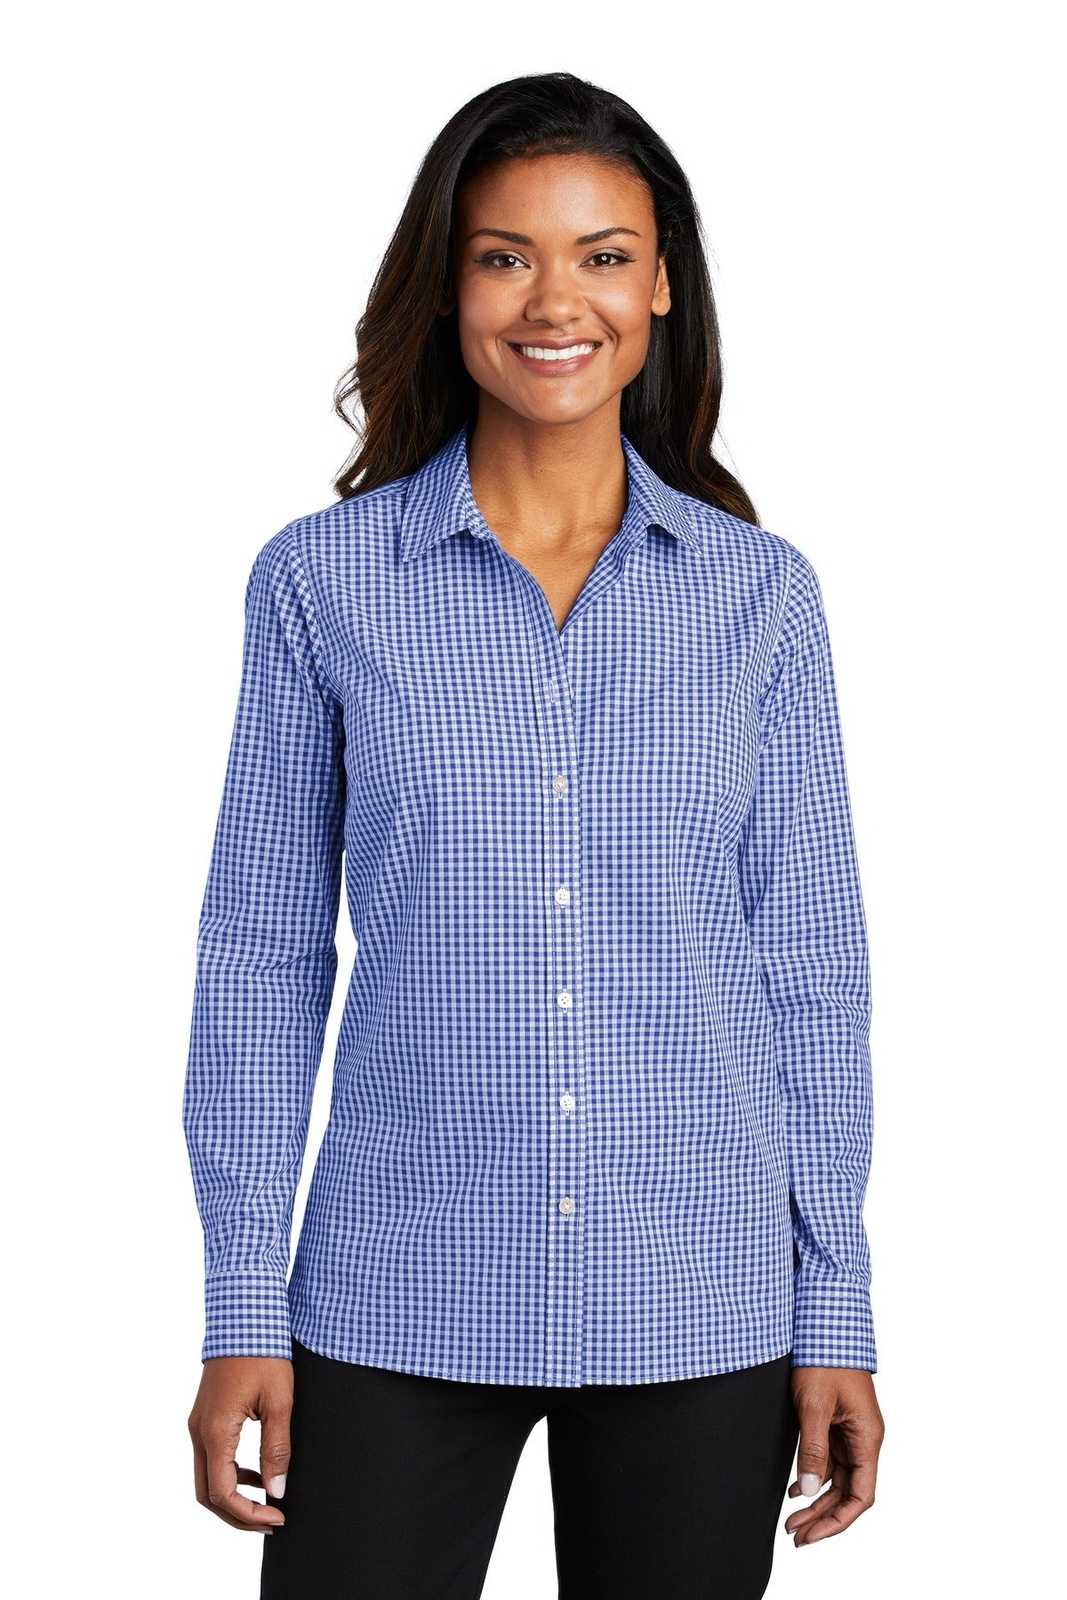 Port Authority LW644 Ladies Broadcloth Gingham Easy Care Shirt - True Royal White - HIT a Double - 1